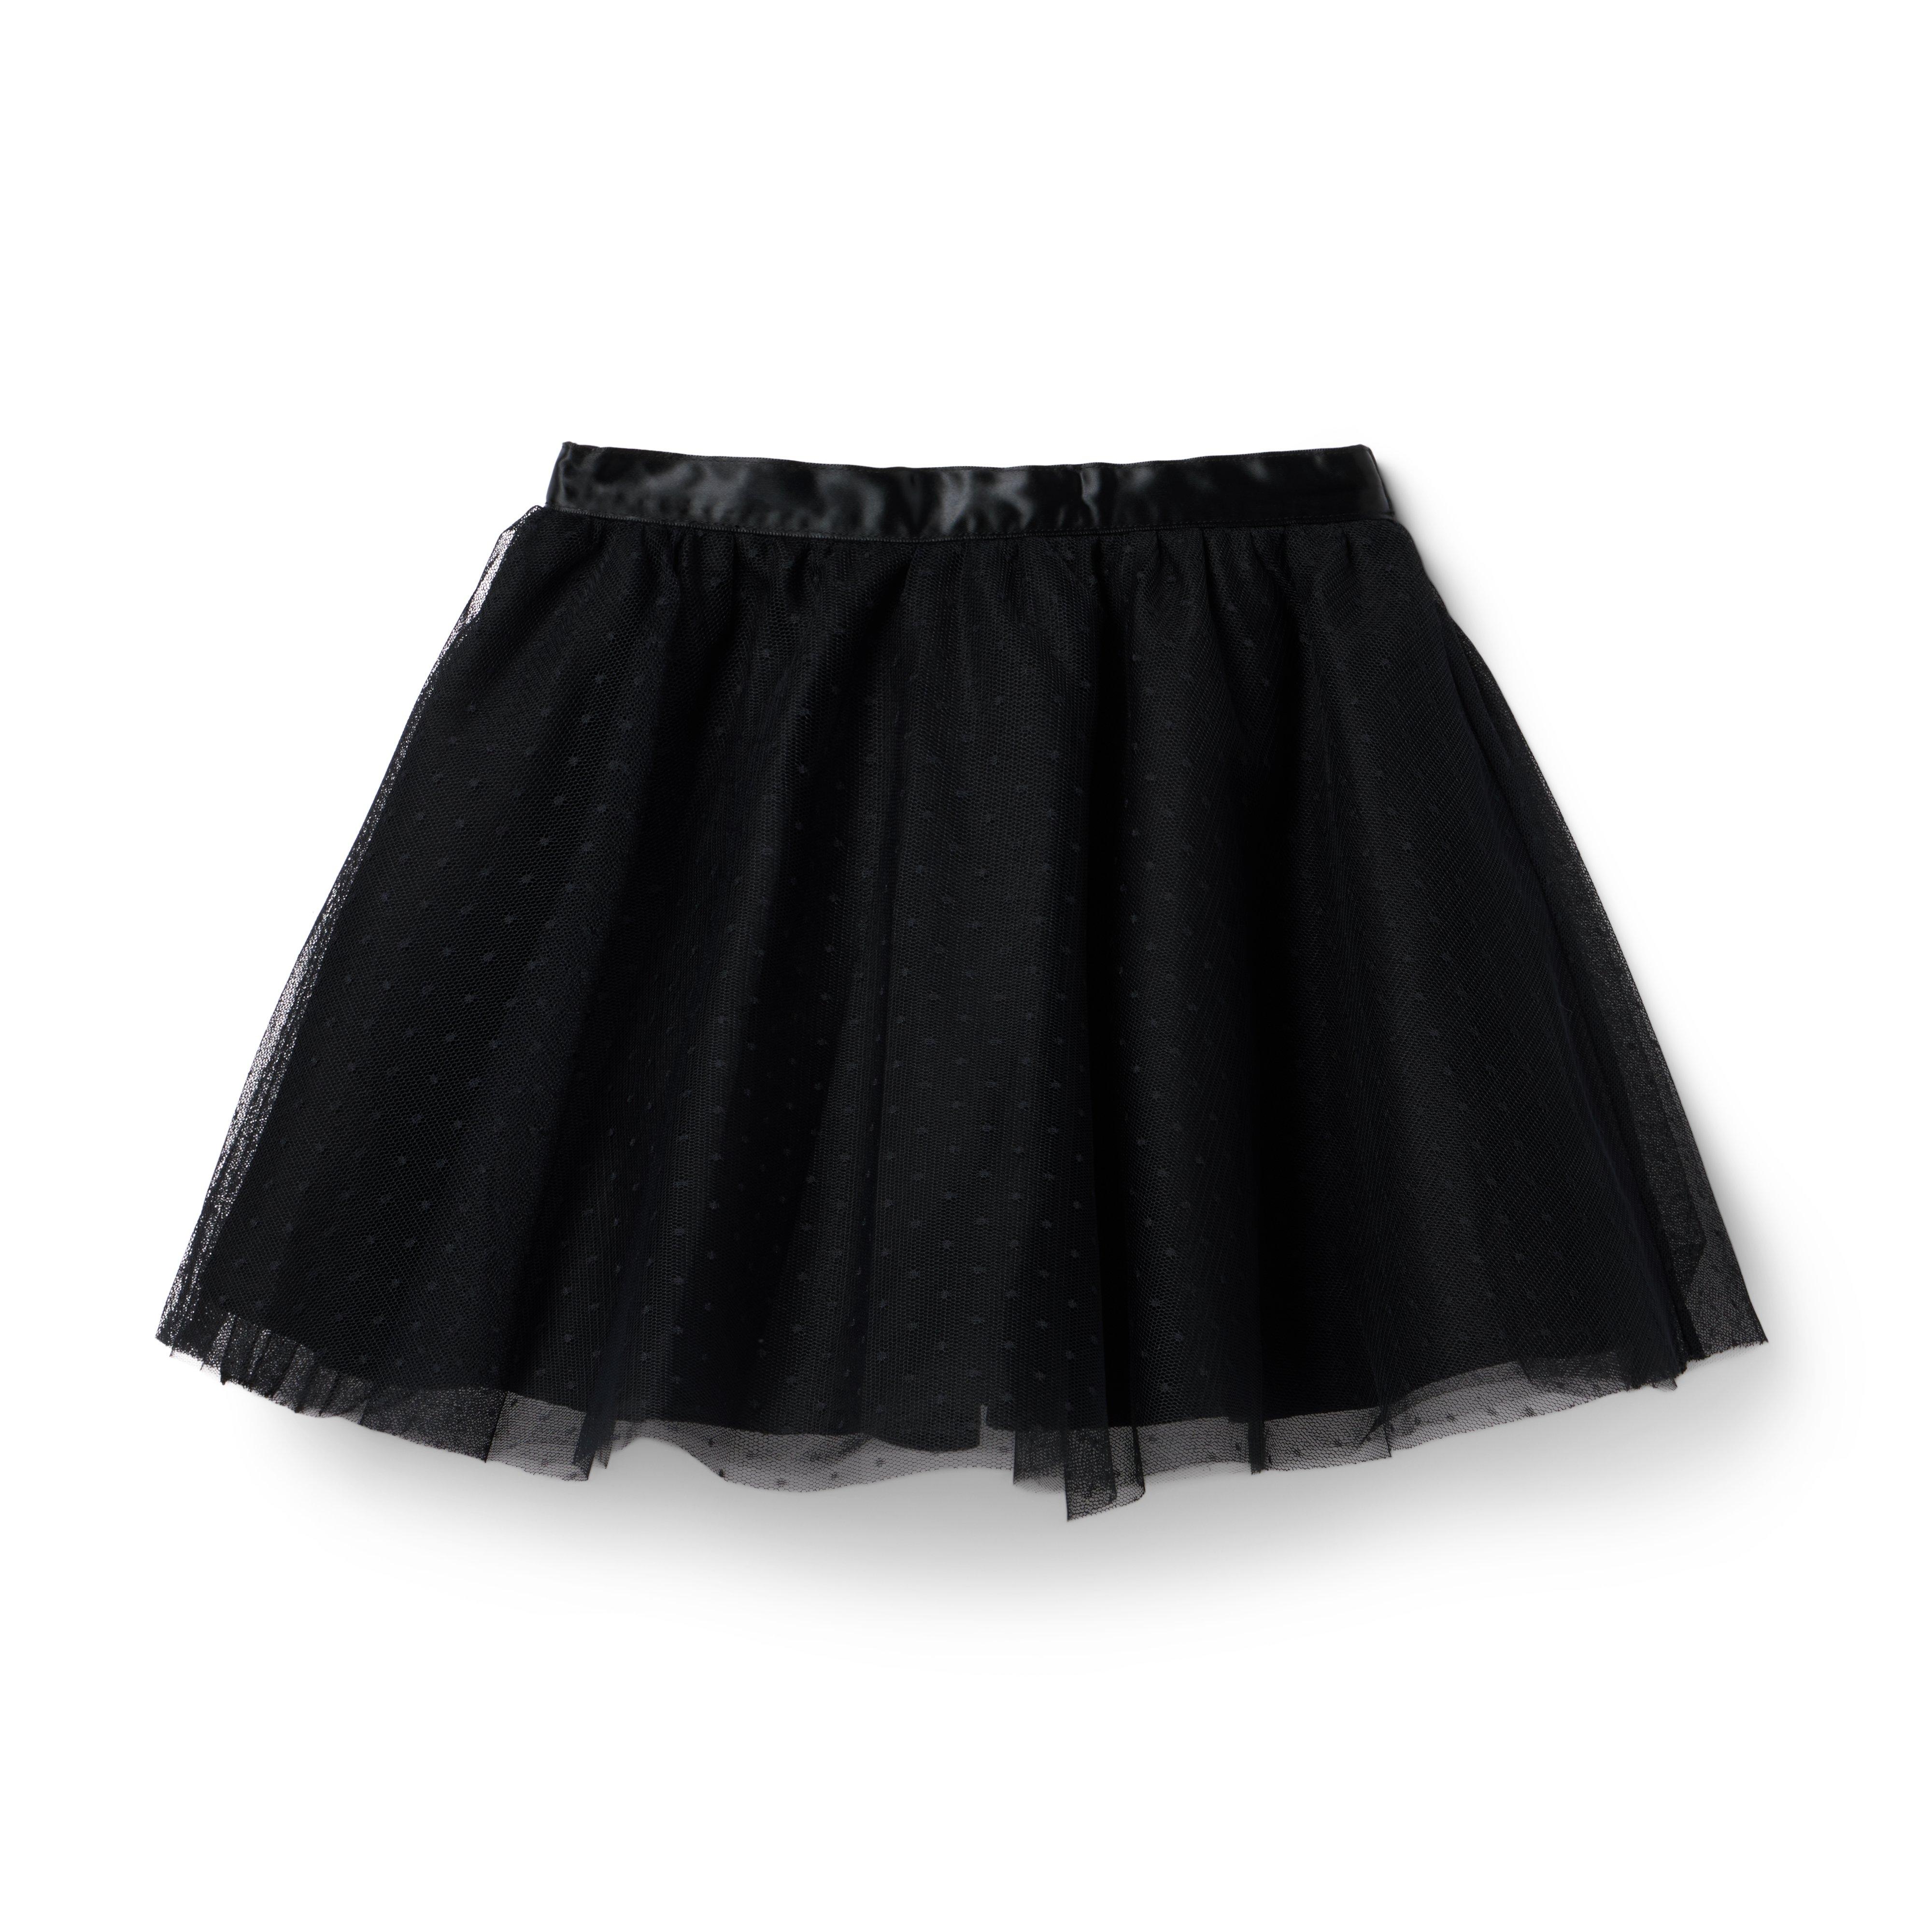 The Tulle Holiday Skirt